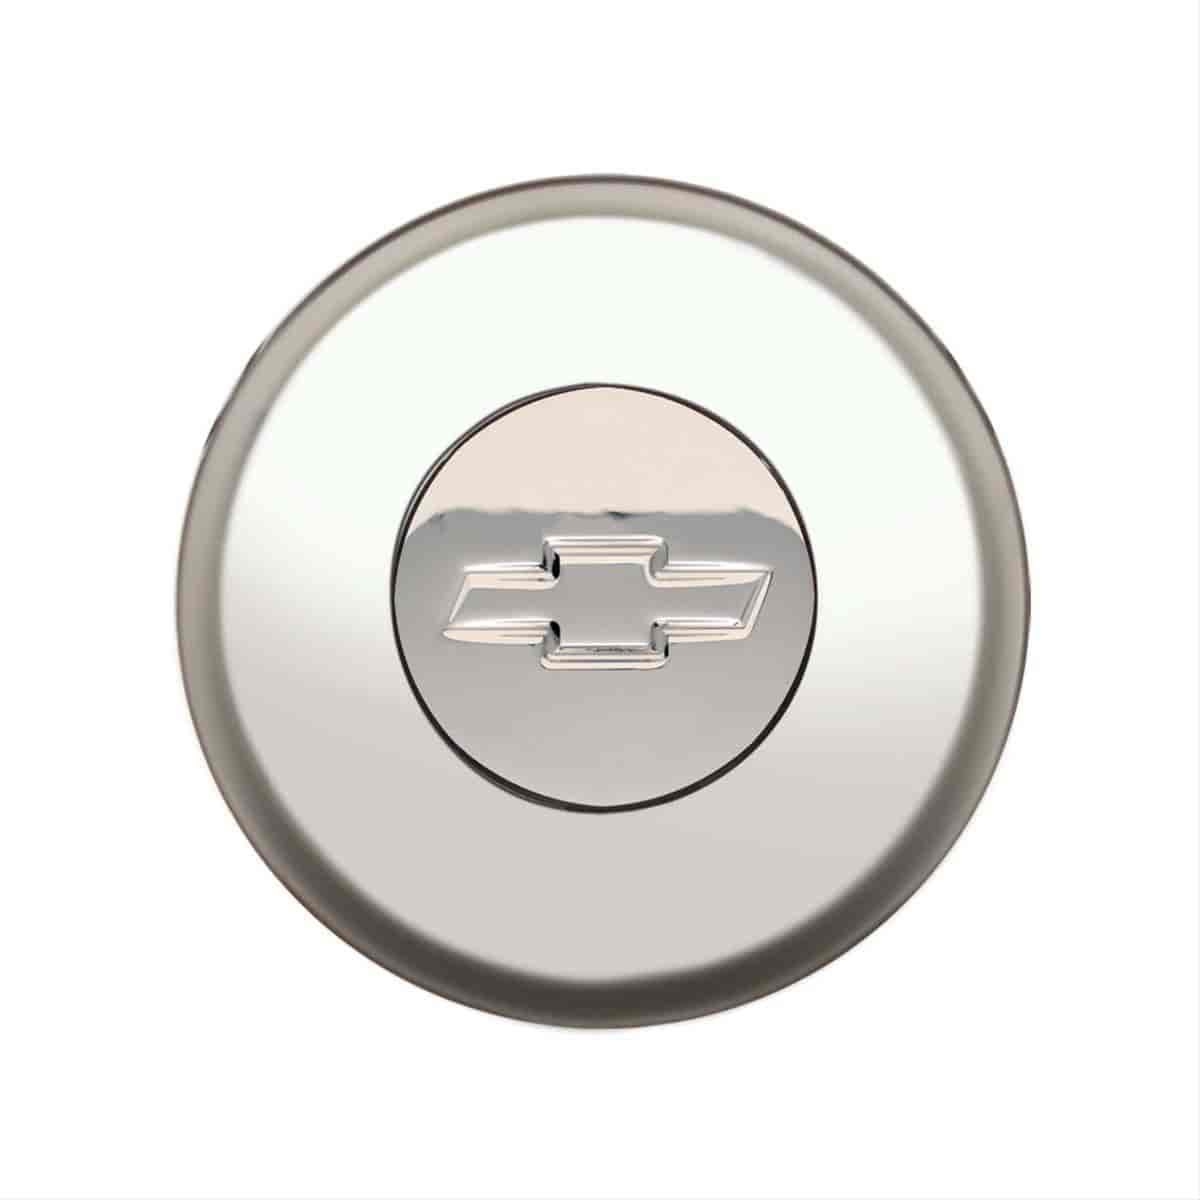 GT3 Gasser/Euro Style Horn Button Engraved Chevy Bowtie Smooth Style Polished